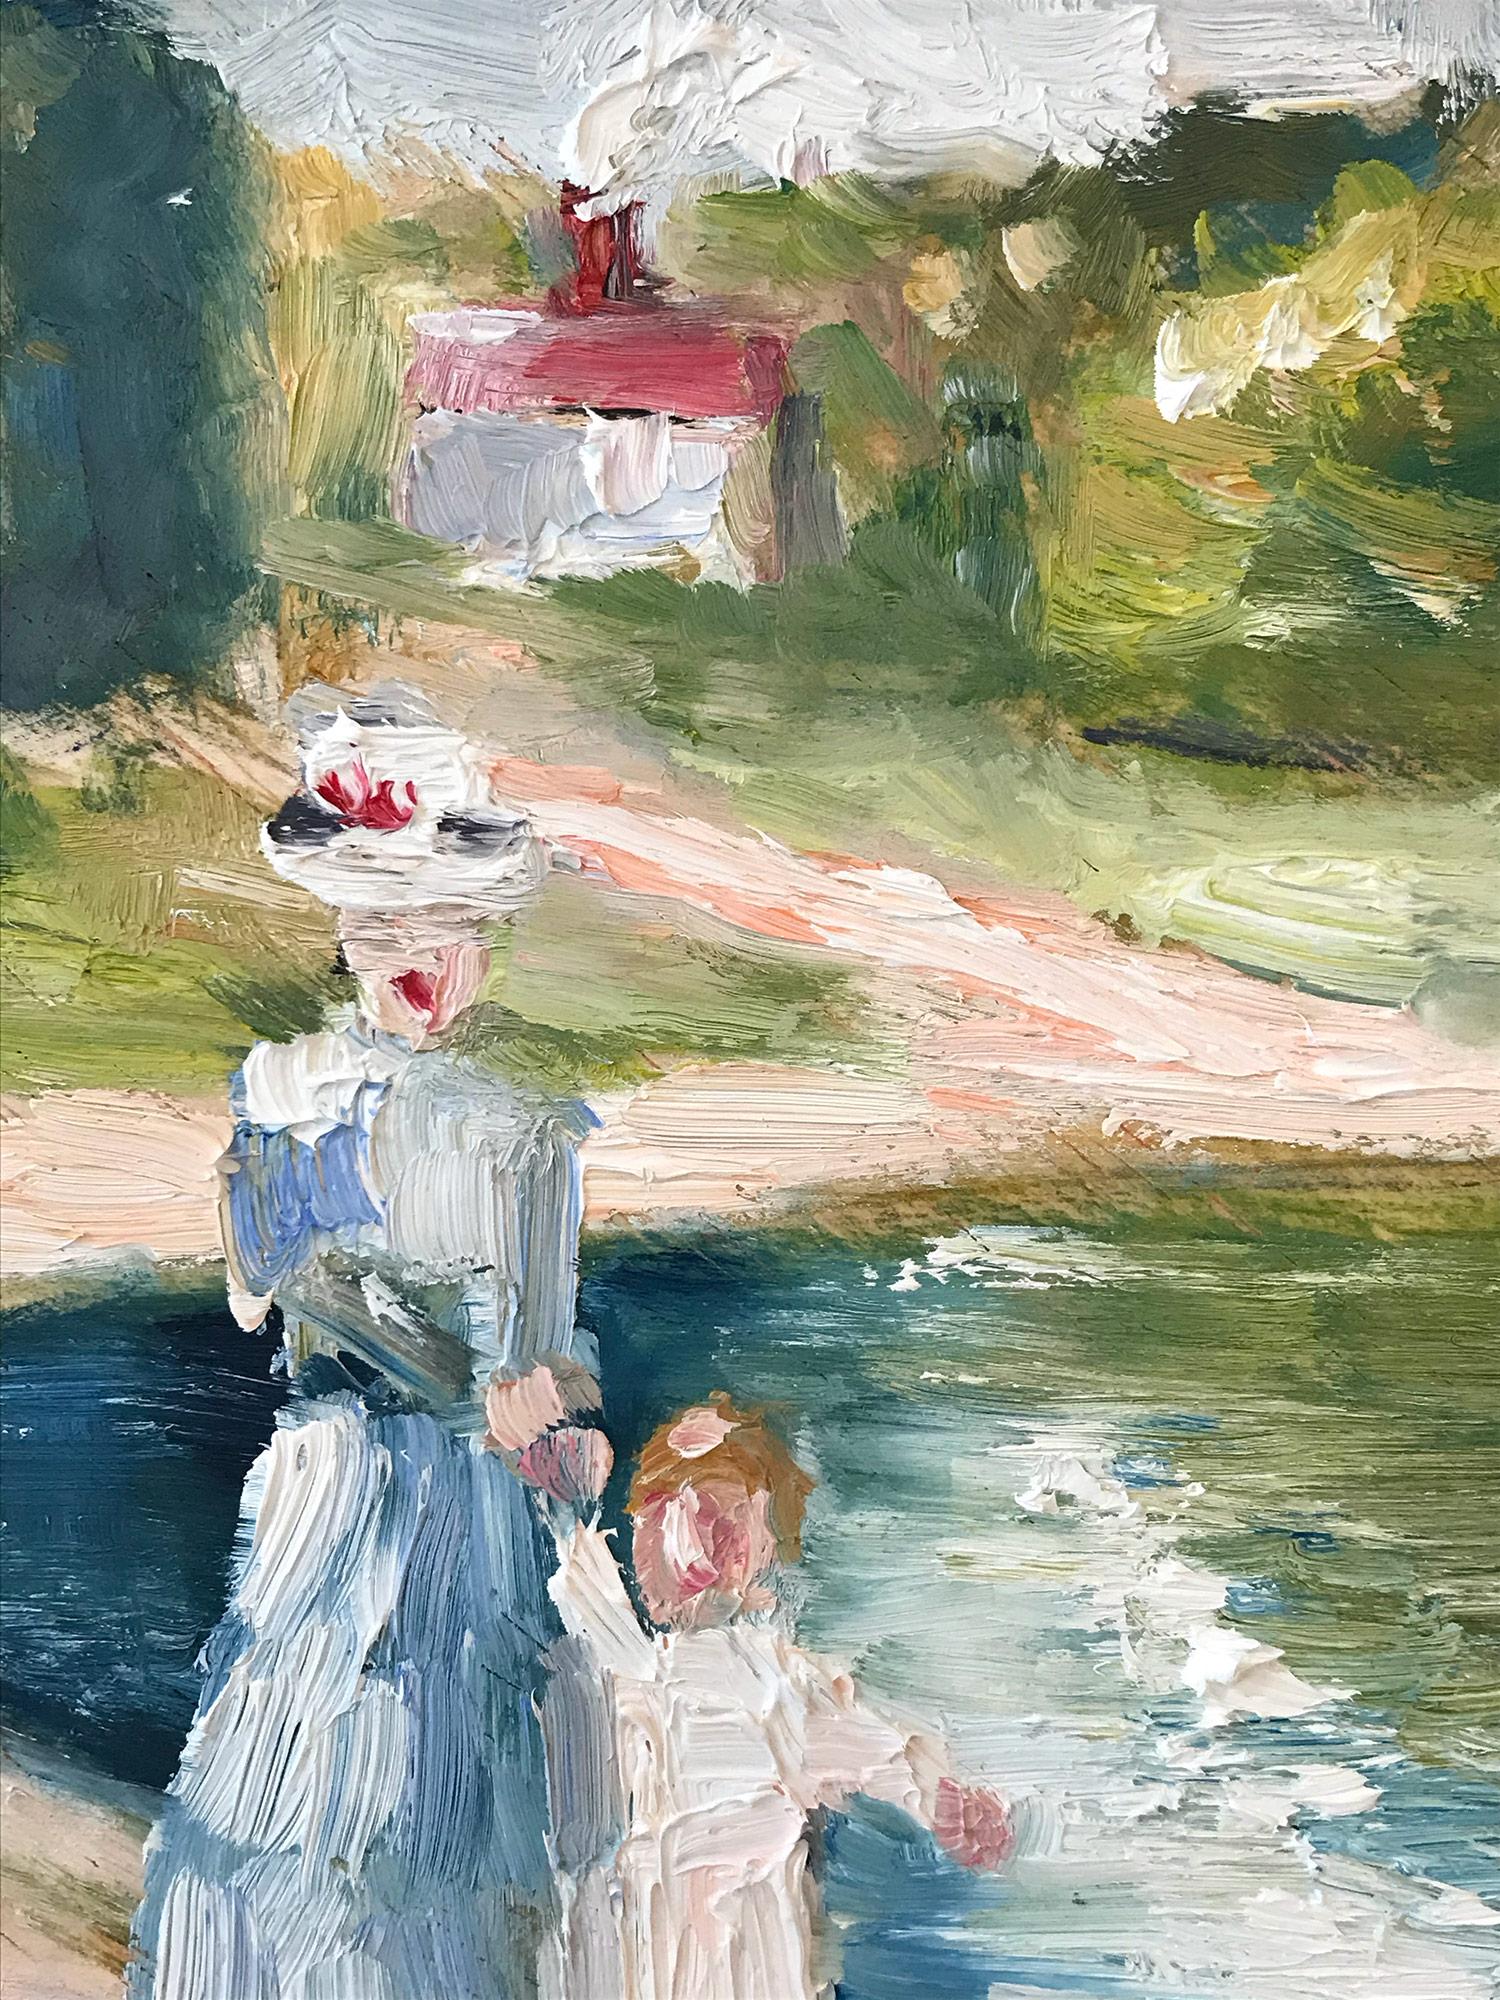 A charming depiction of Mother and Child holding hands by the pond near the French Country SIde with their family dog at their side. A cozy impressionistic scene with warmth and feeling. Whimsical and colorful we are left with stunning details and